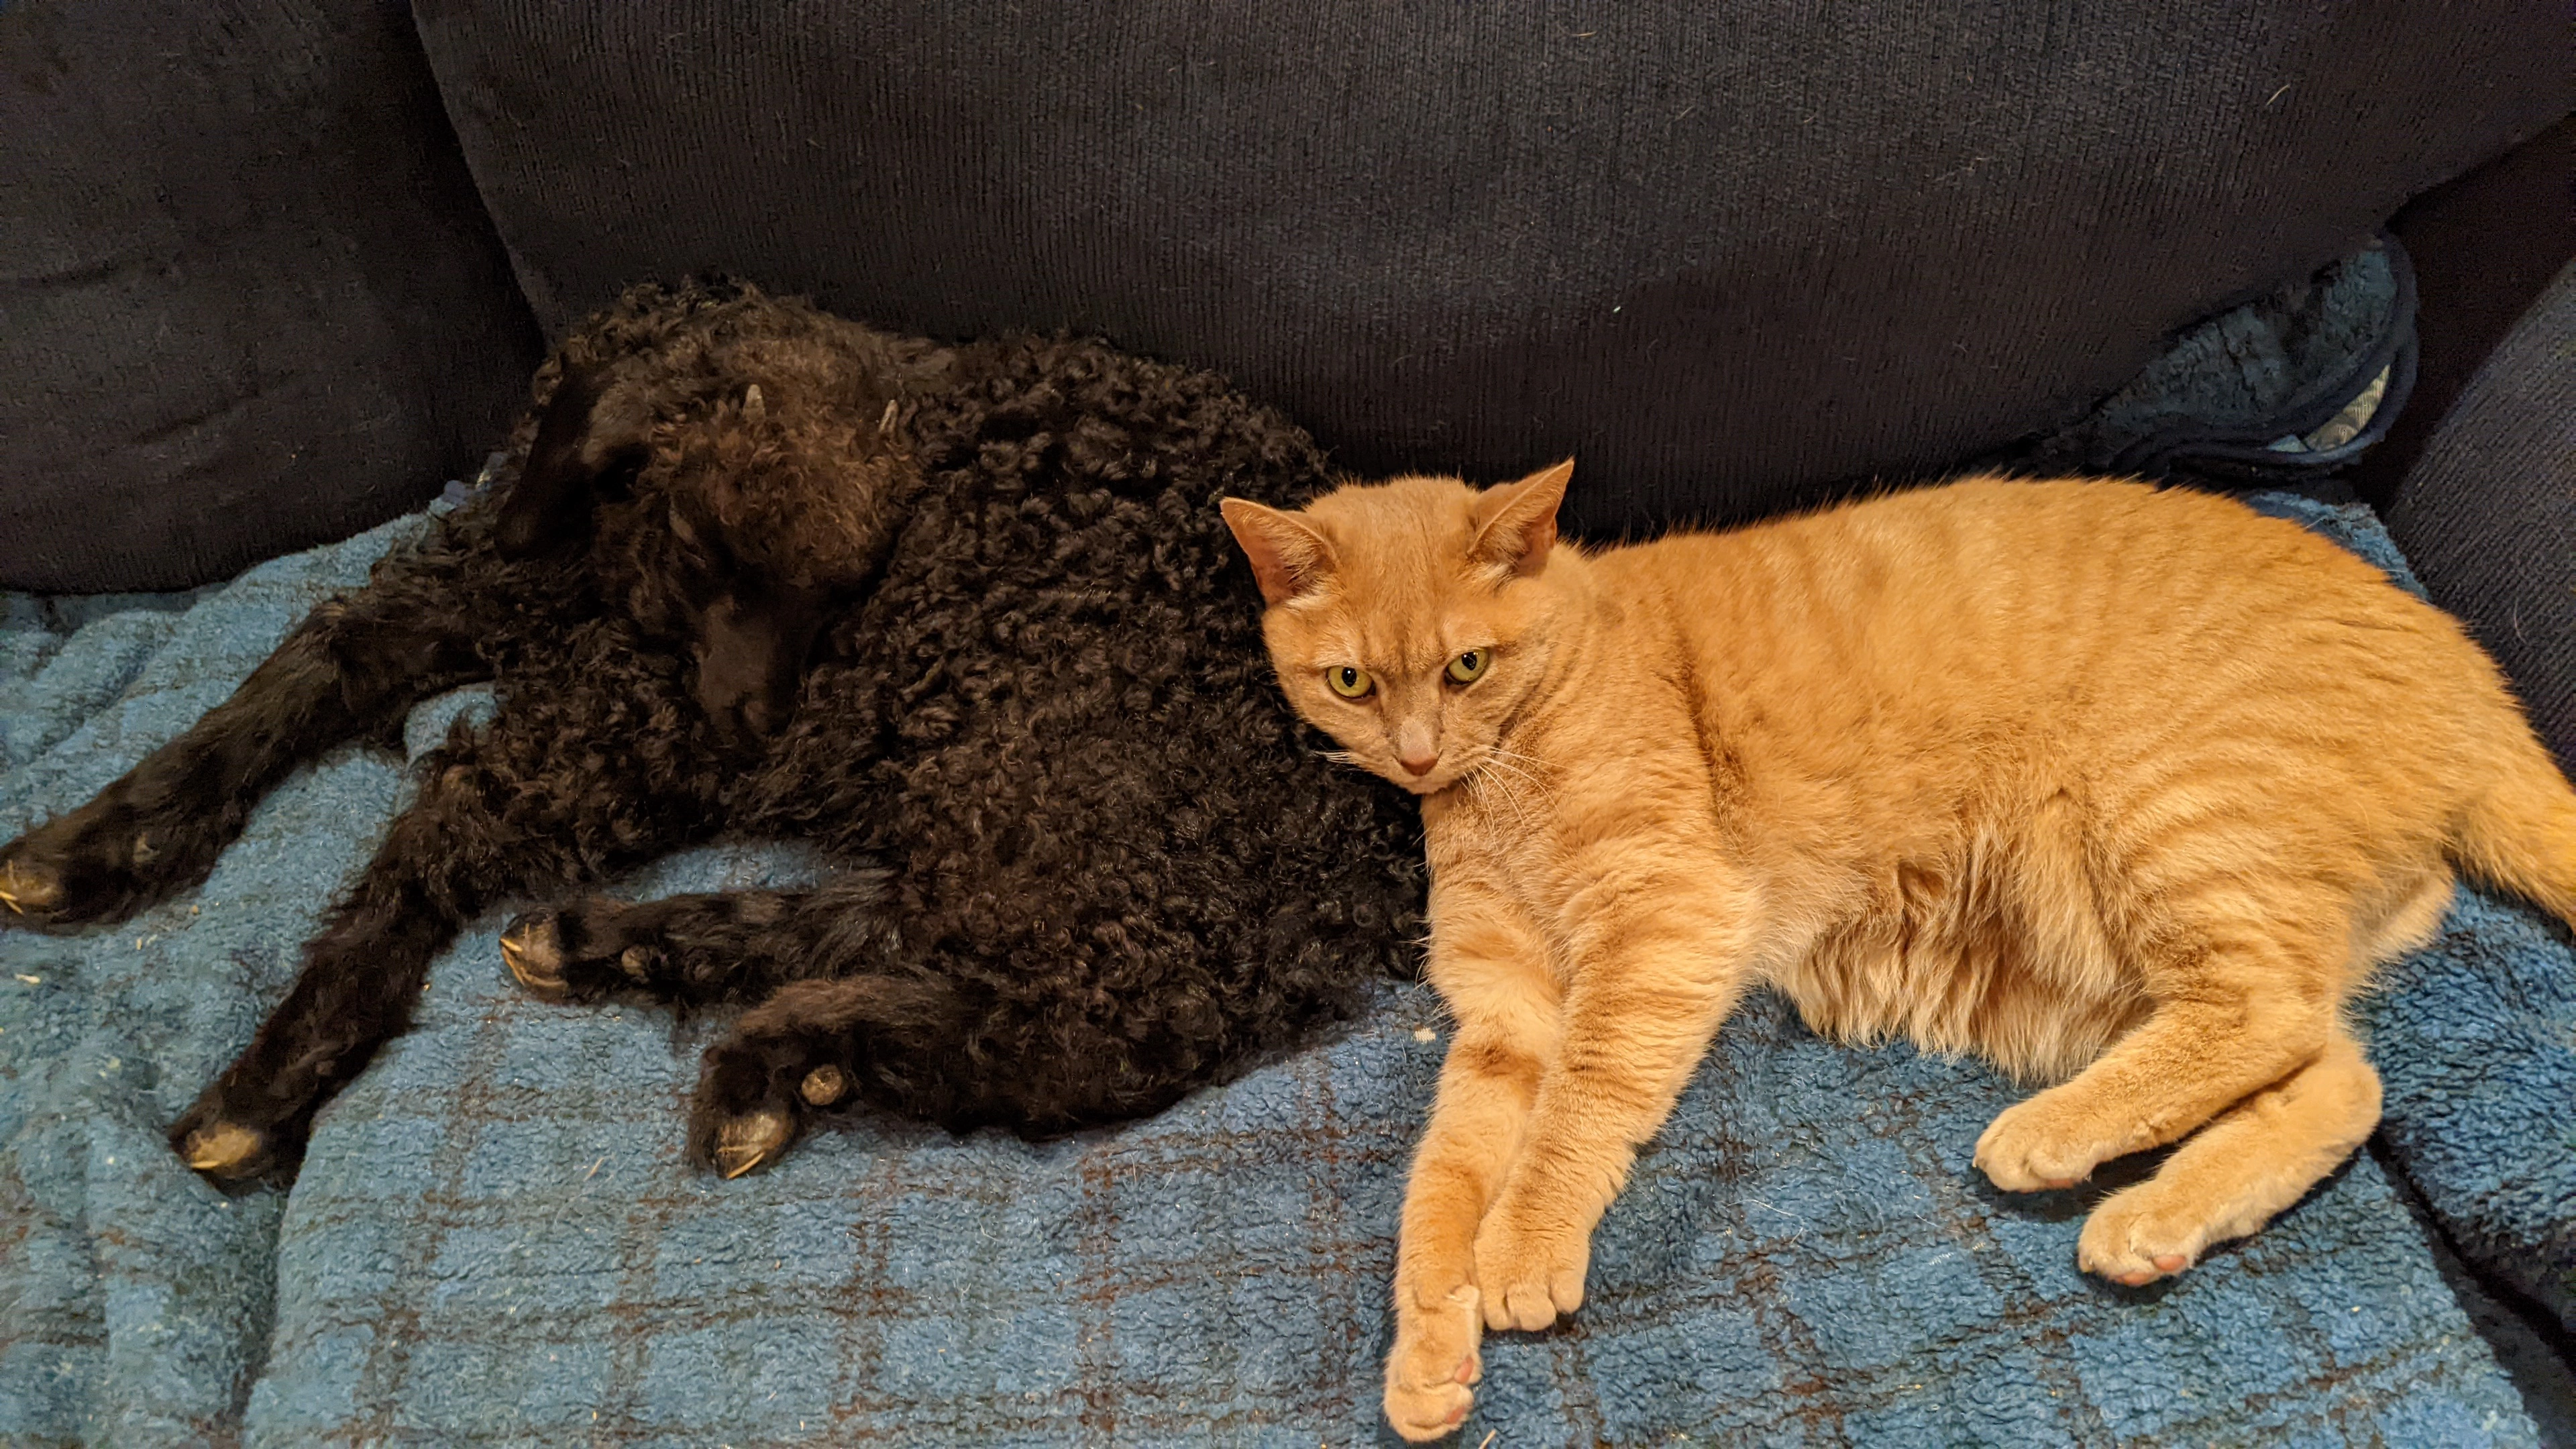 An image of a goat named Teff curled up on a couch with a cat.